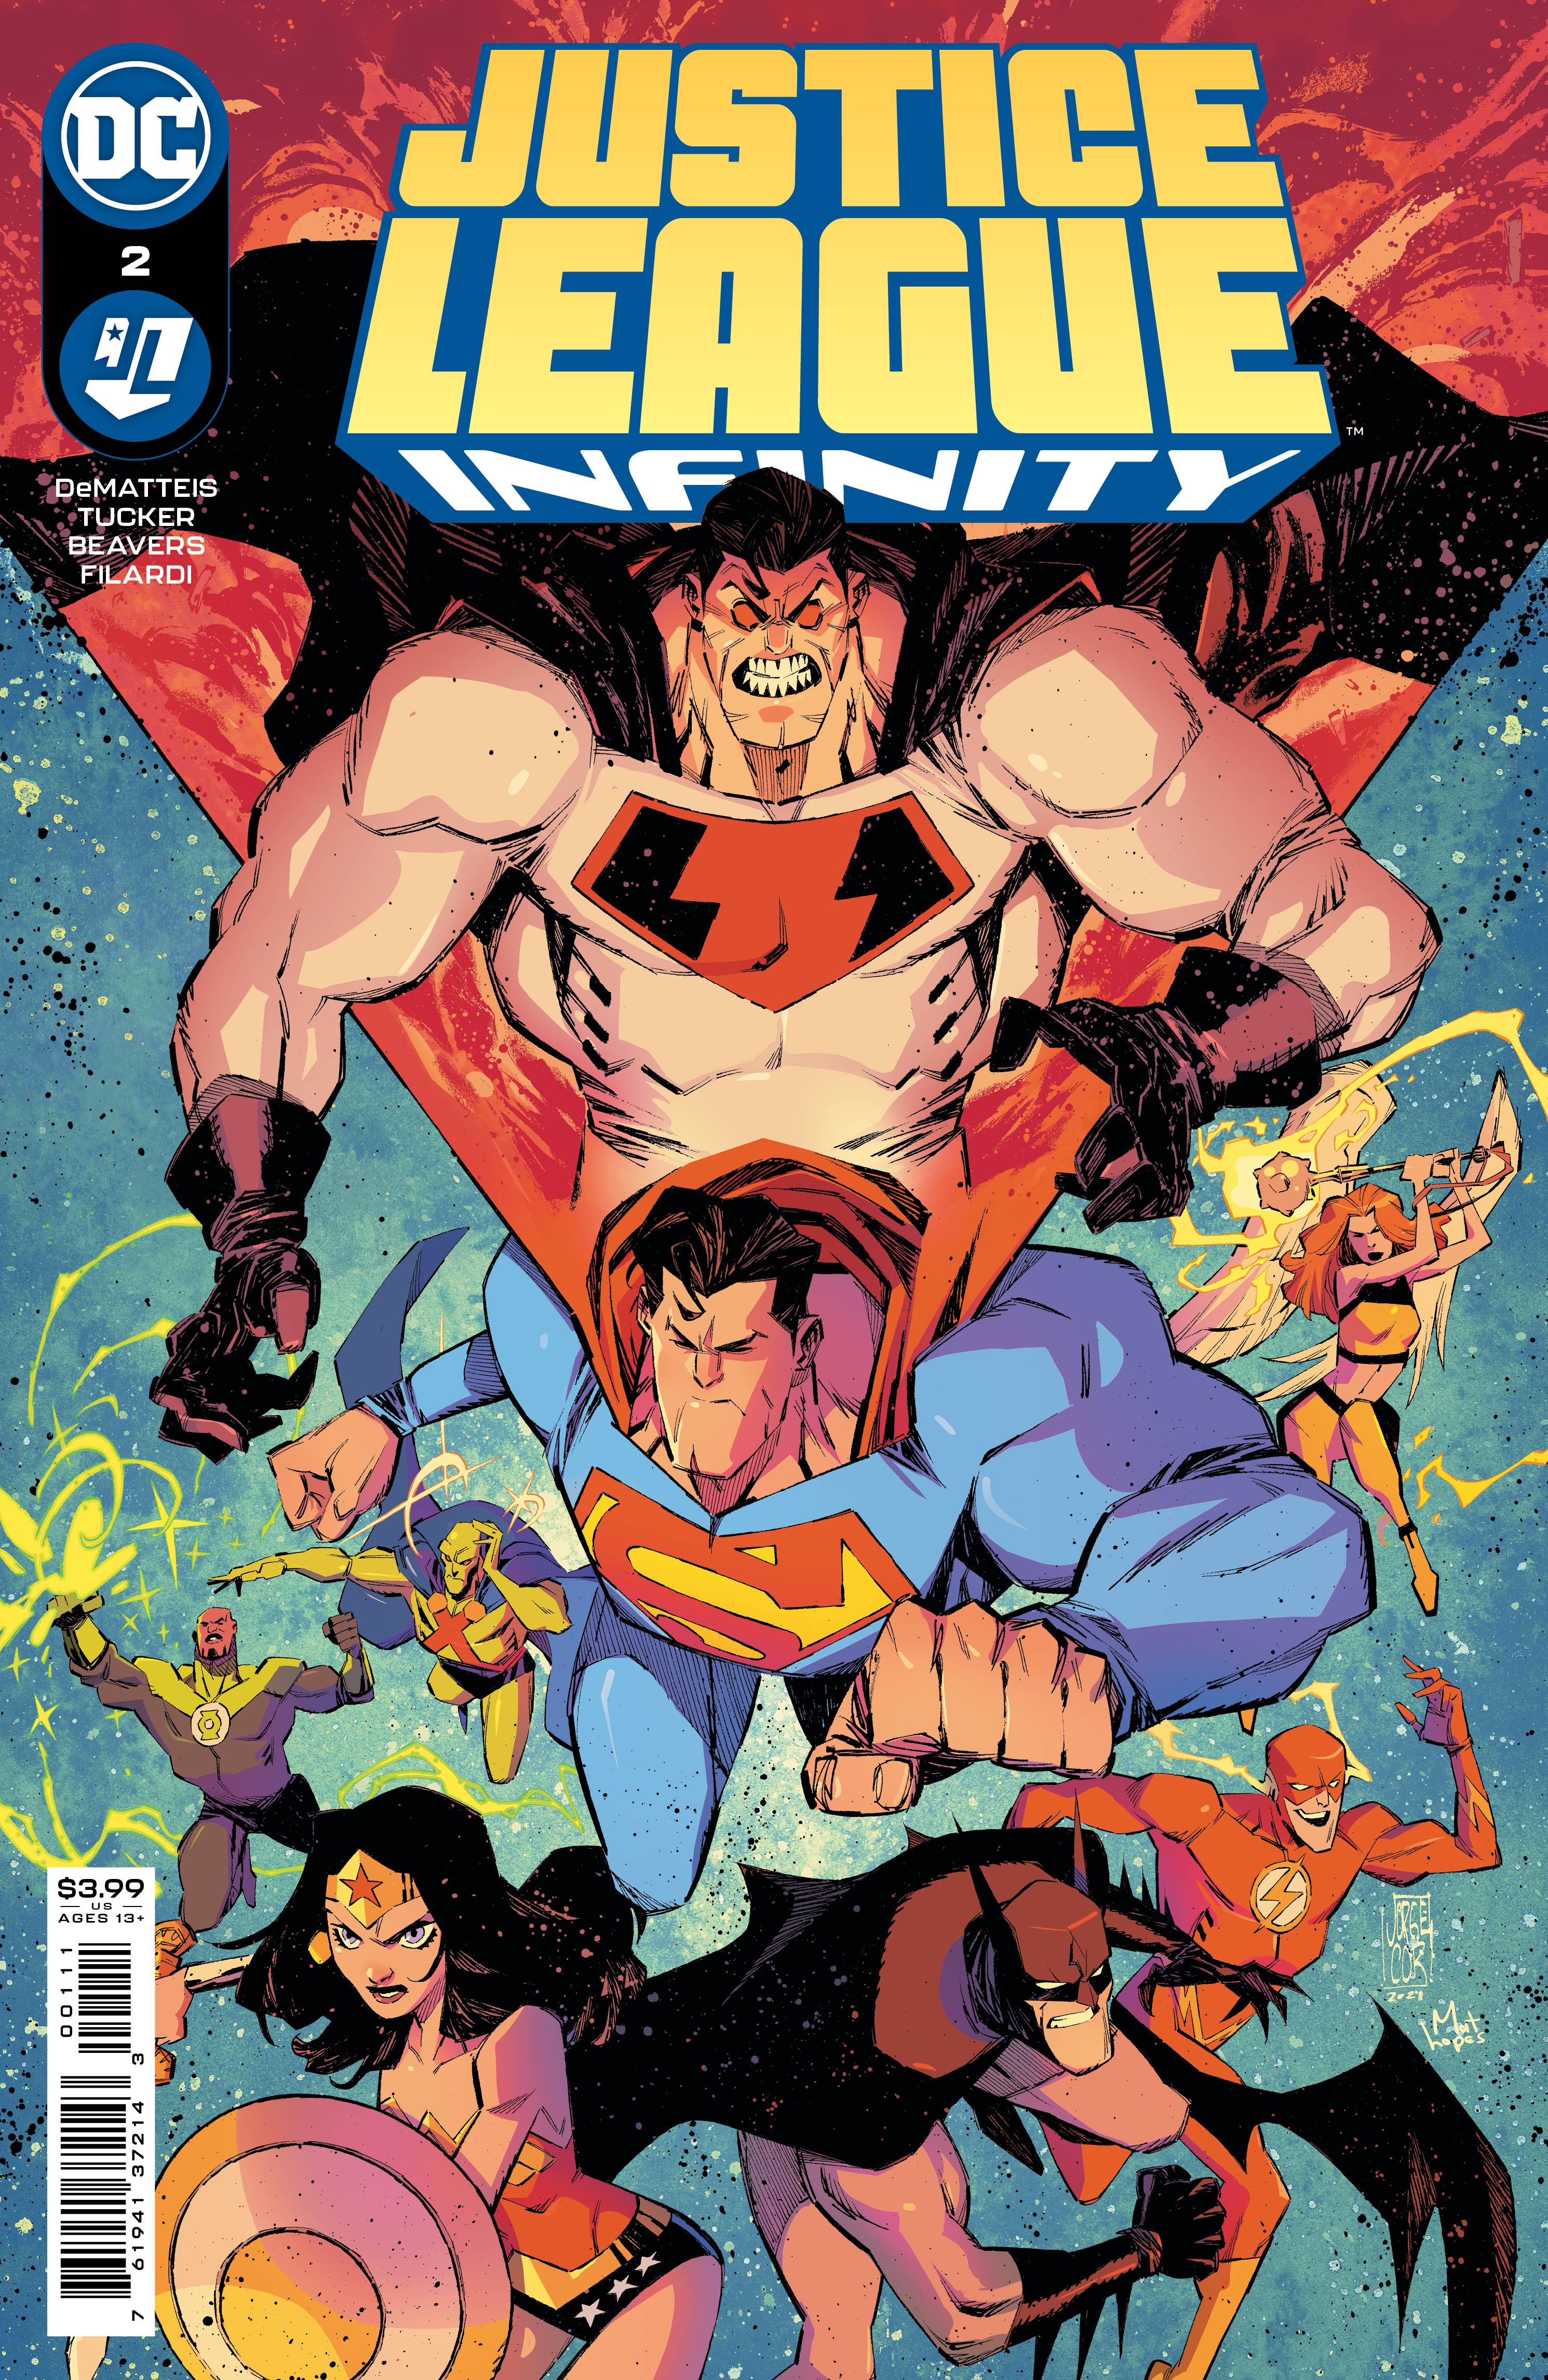 JUSTICE LEAGUE INFINITY #2 | Game Master's Emporium (The New GME)